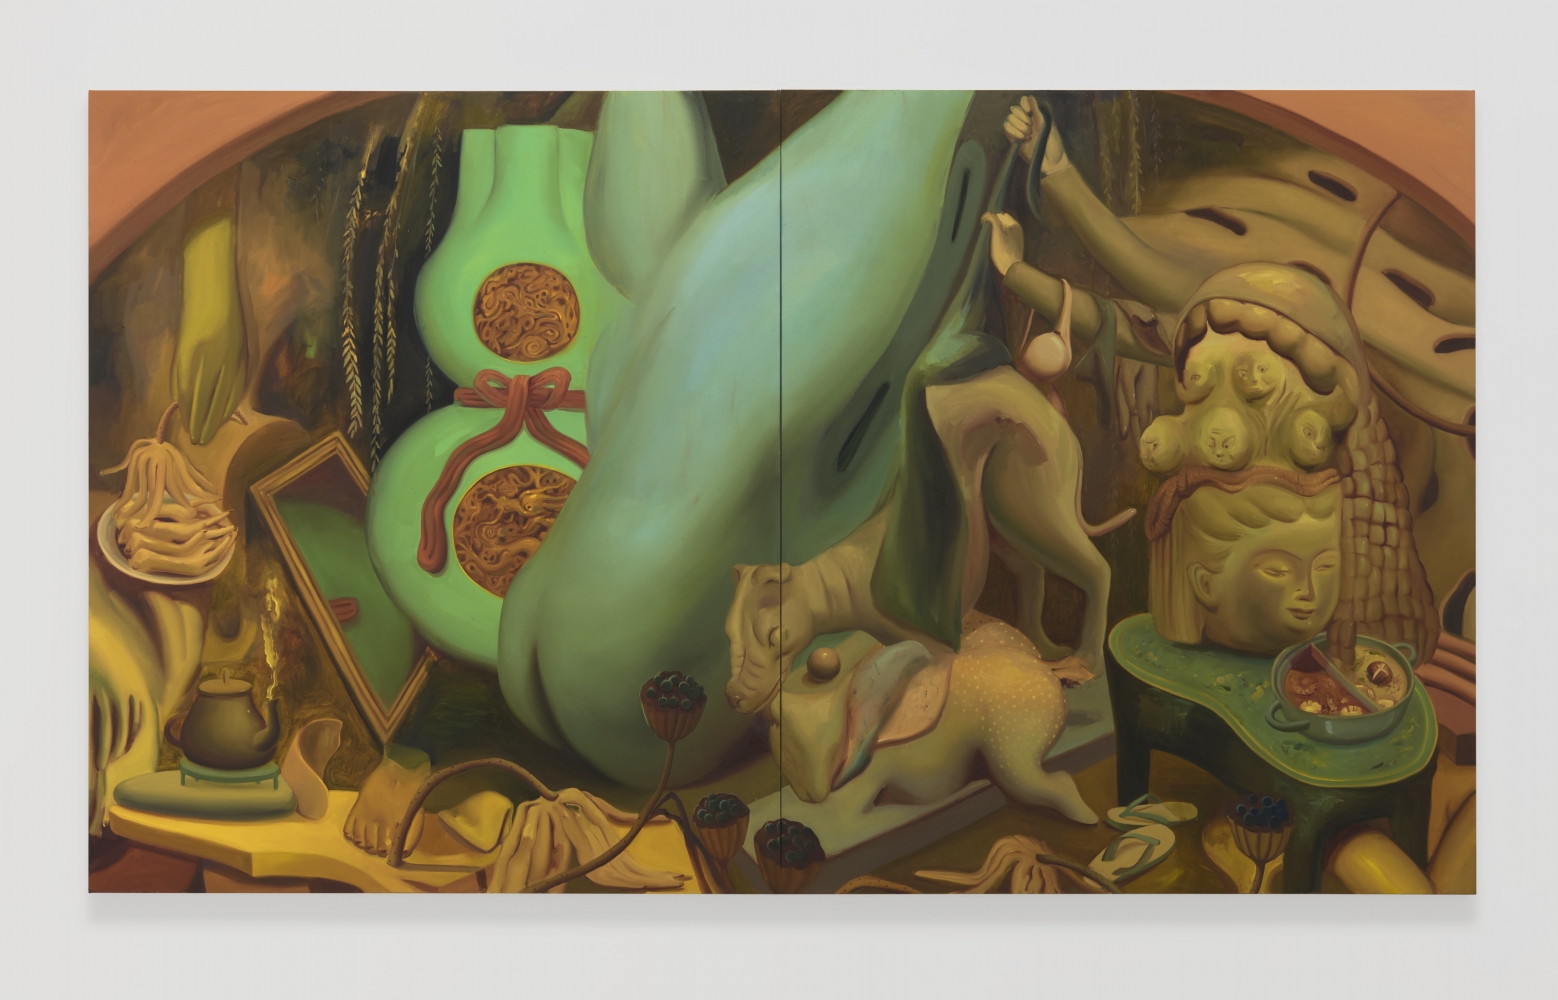 Dominique Fung
Material Manifestations in the Act of Remembrance, 2020
oil on canvas
84 x 144 in
213.34 x 365.8 cm